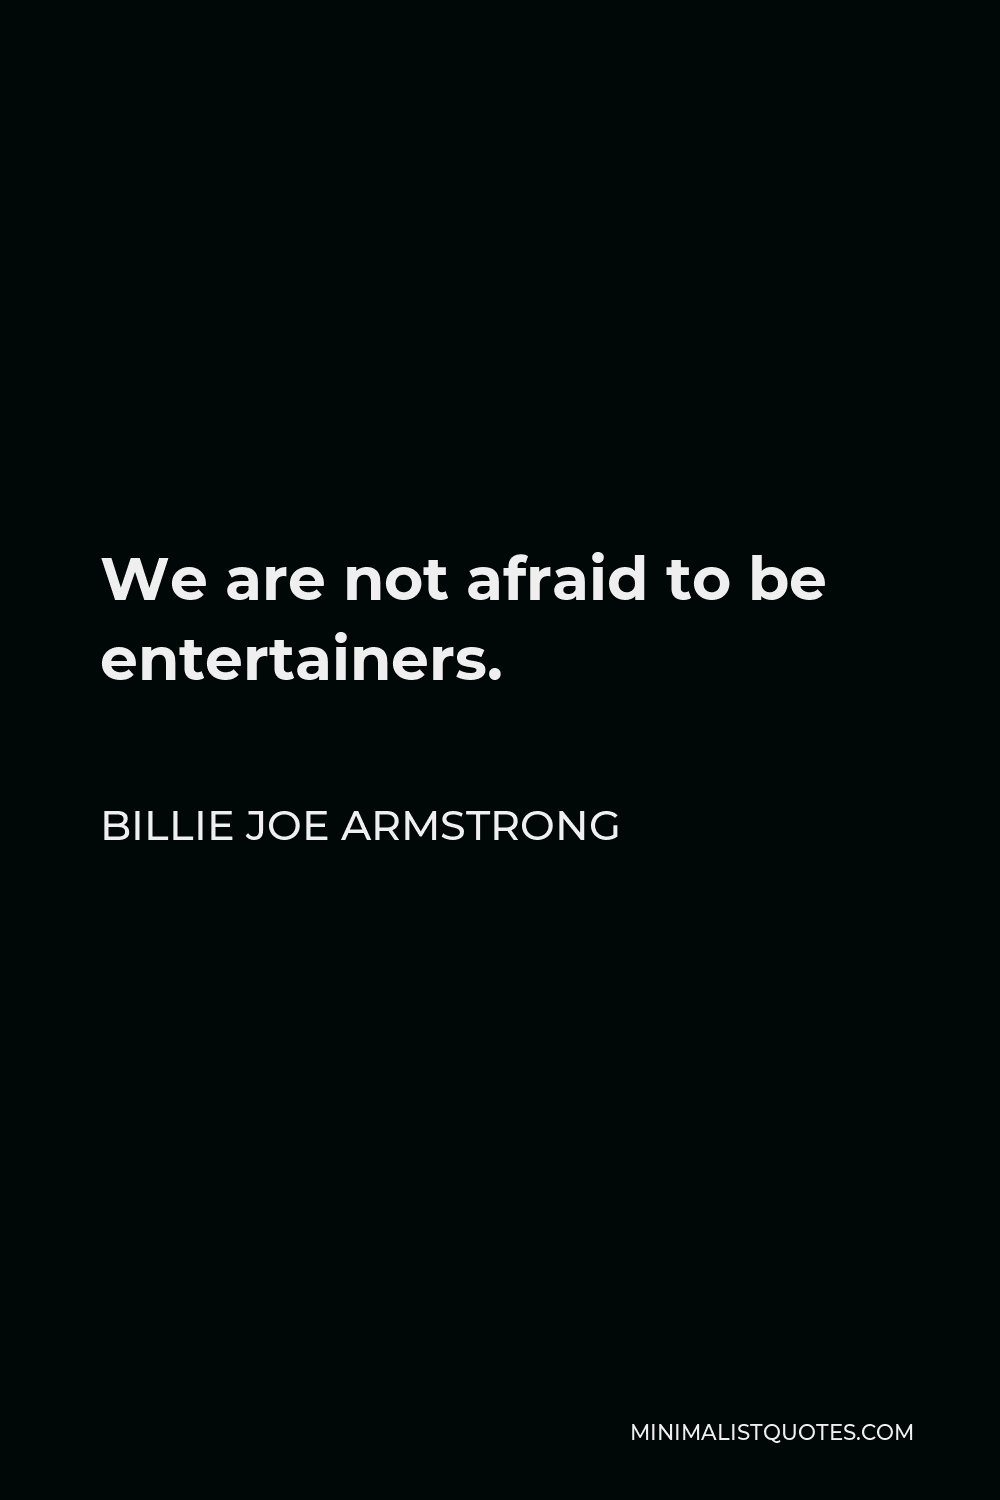 Billie Joe Armstrong Quote - We are not afraid to be entertainers.